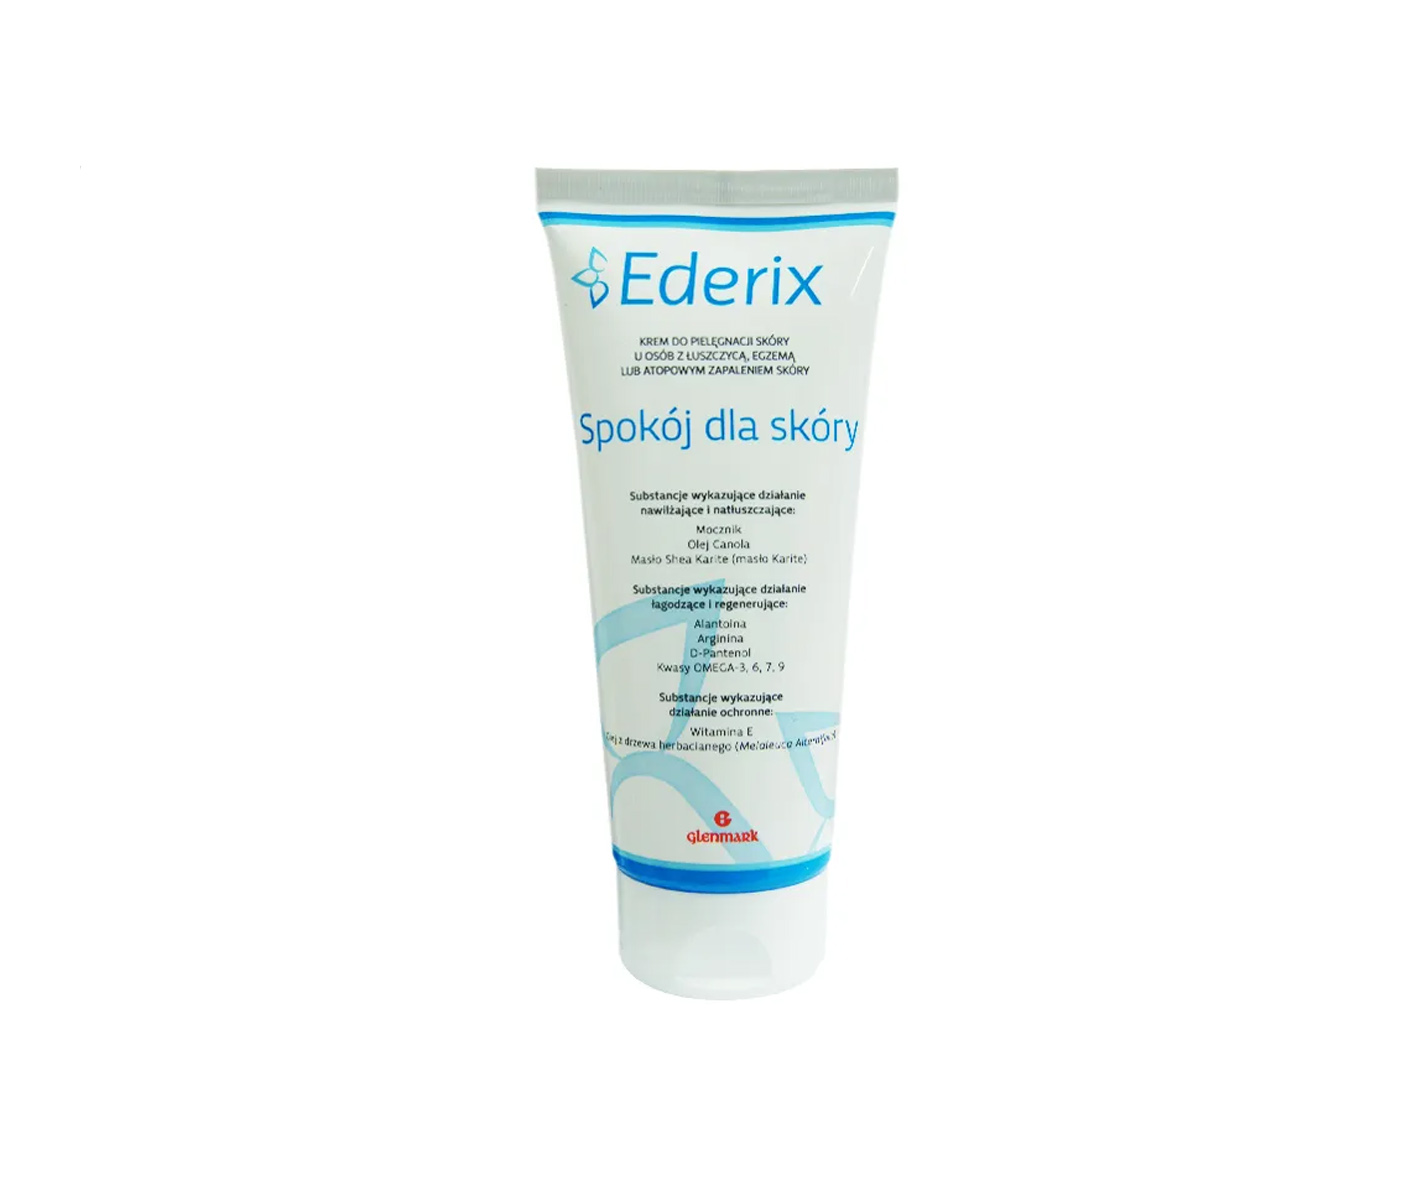 Ederix, Calm for the skin, cream for the care of problematic skin